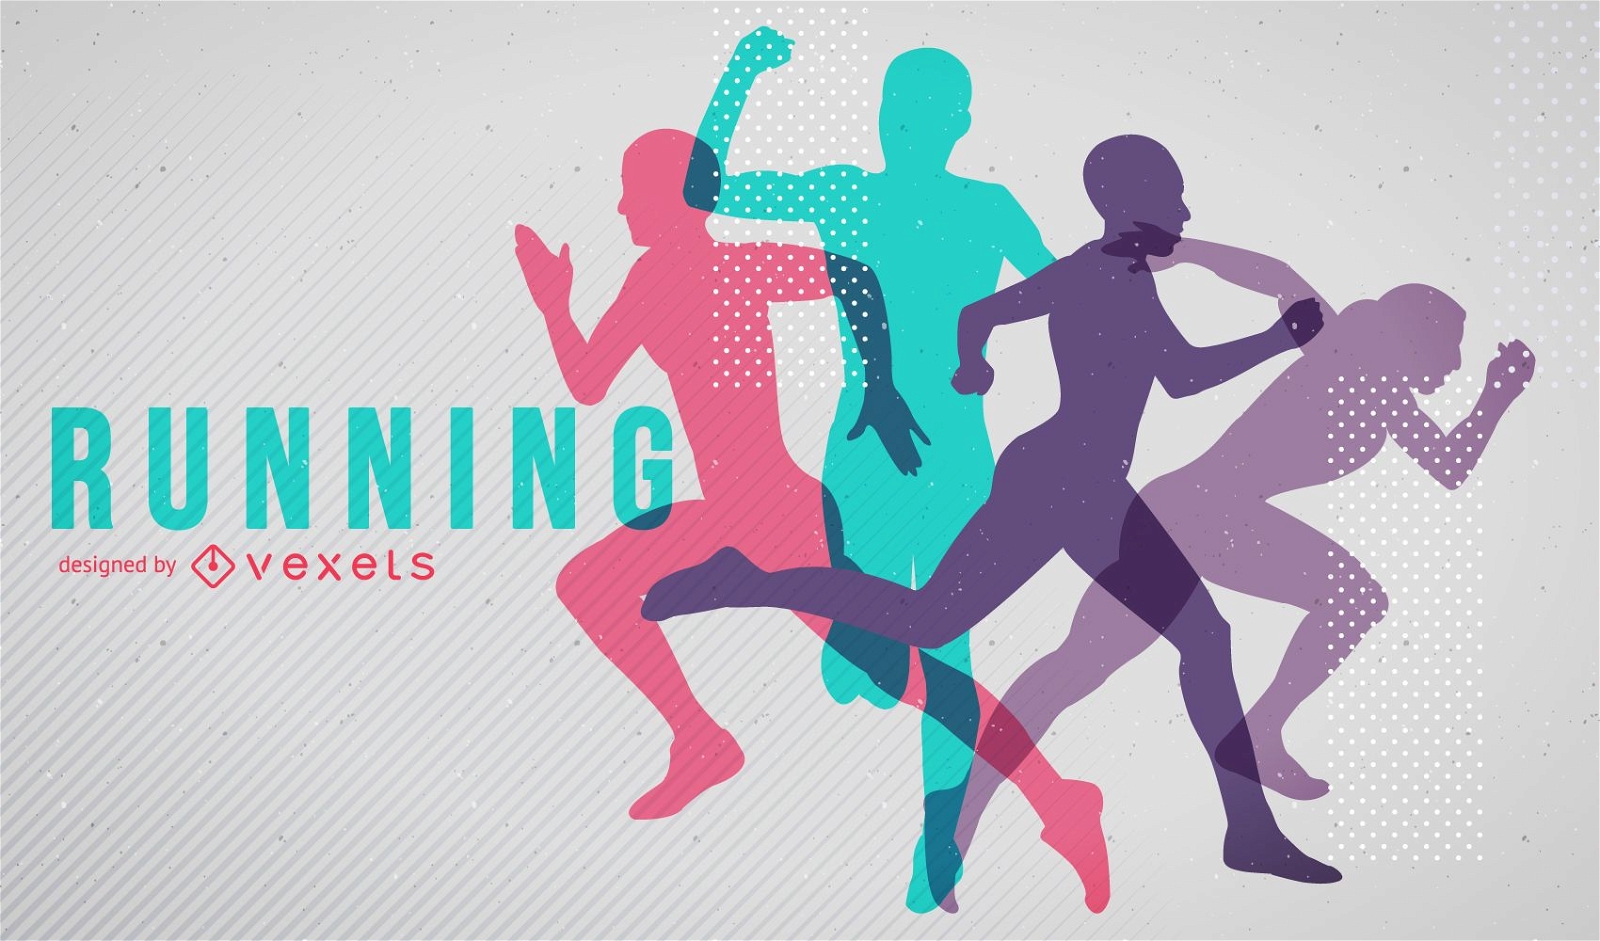 Bright running silhouettes poster